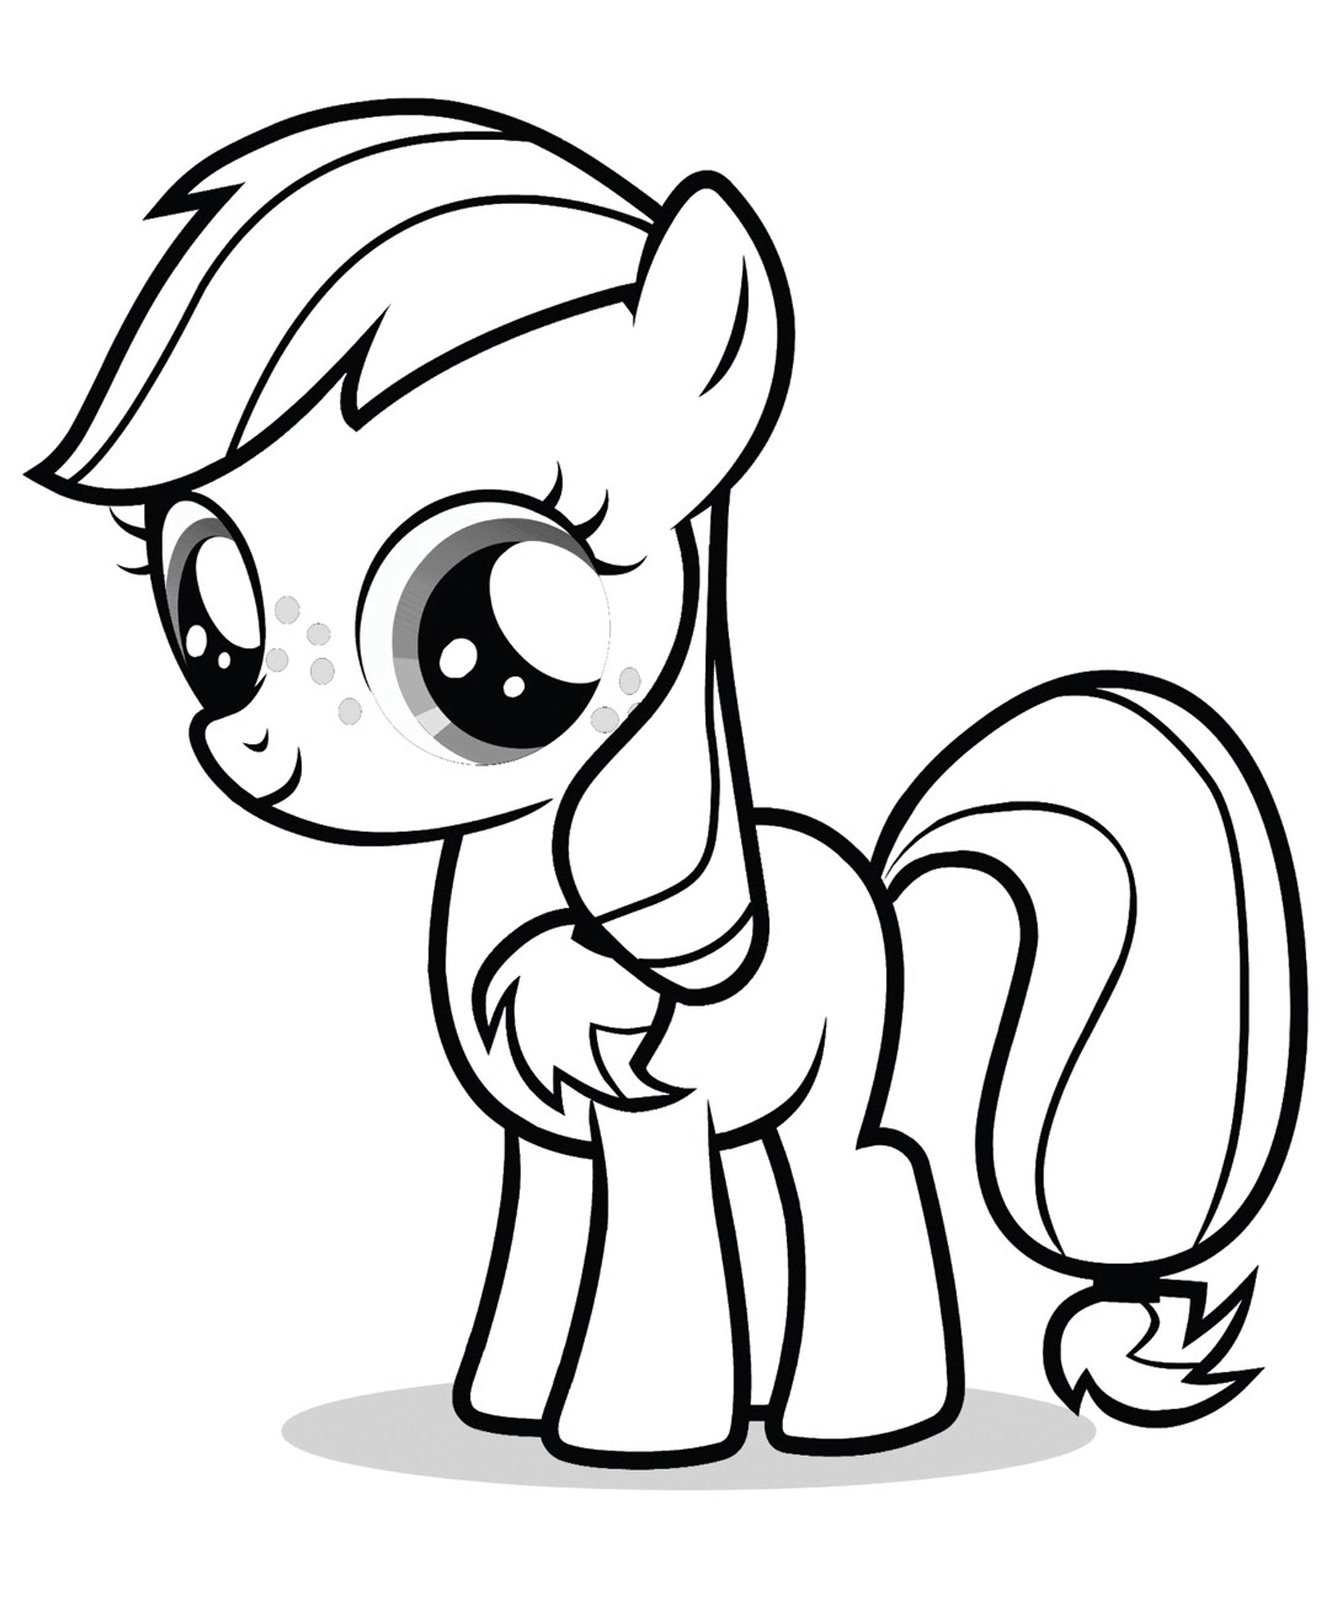 63 Top My Little Pony Babies Coloring Pages Pictures